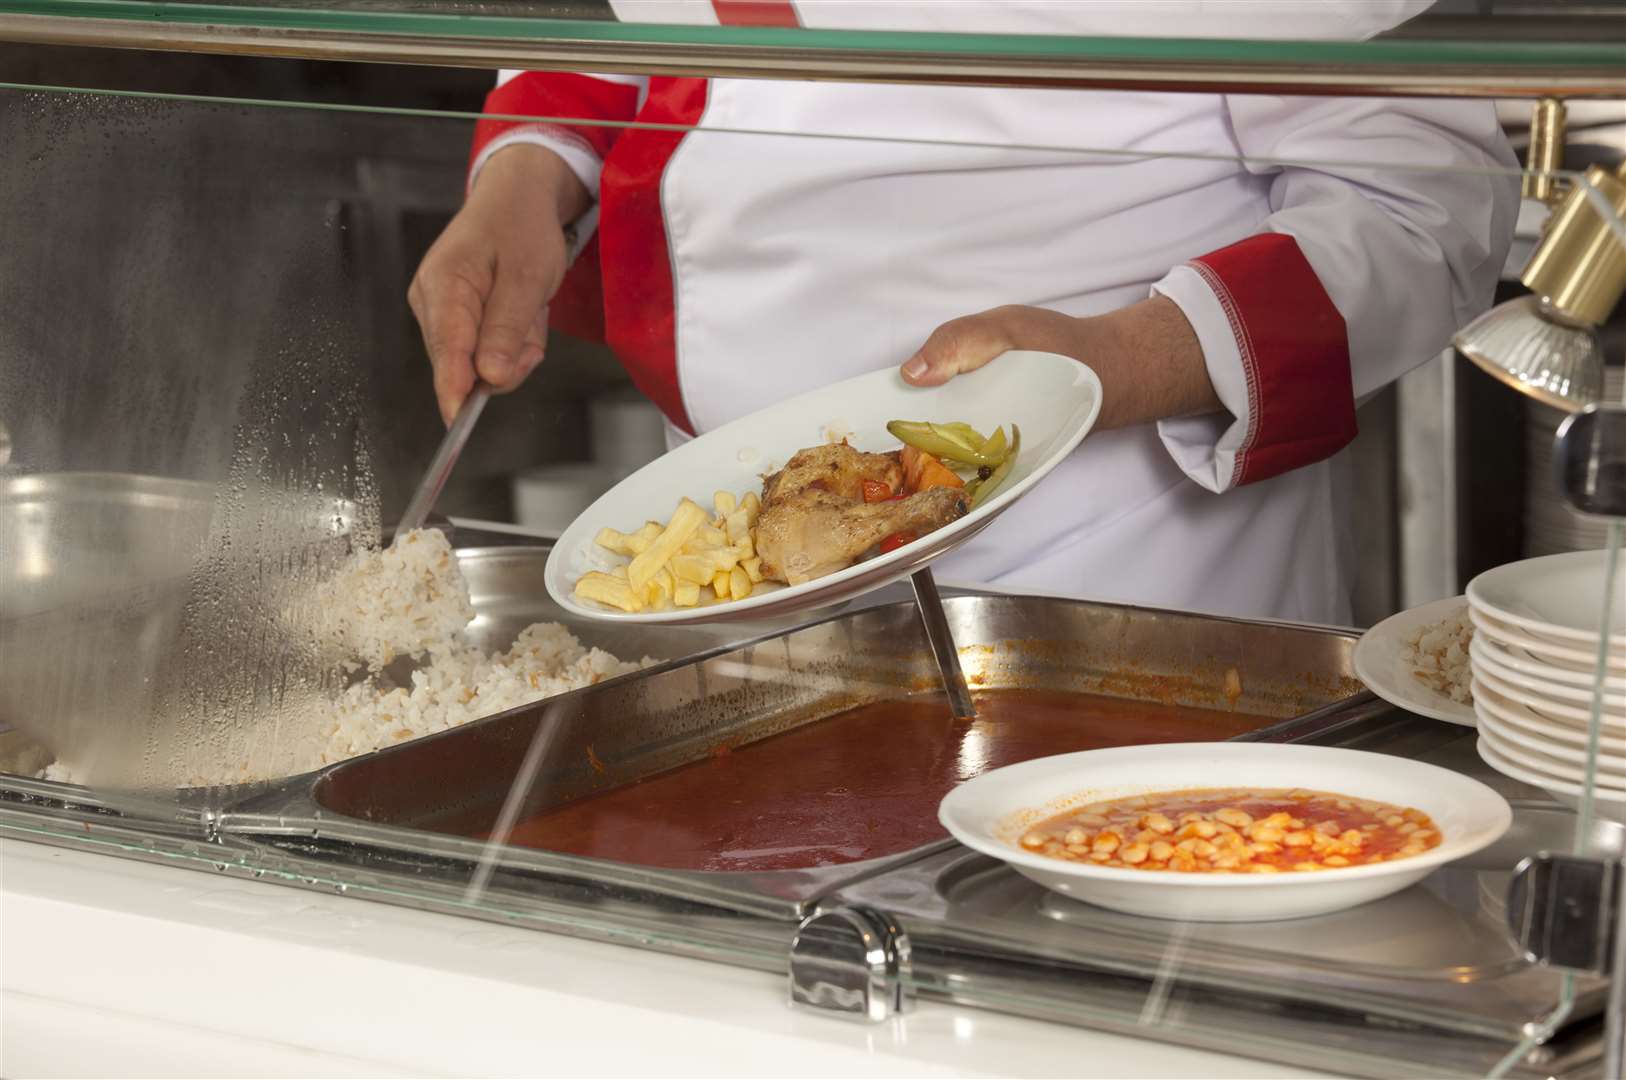 School meals could go up by 4.6 per cent if councillors agree to budget proposals.